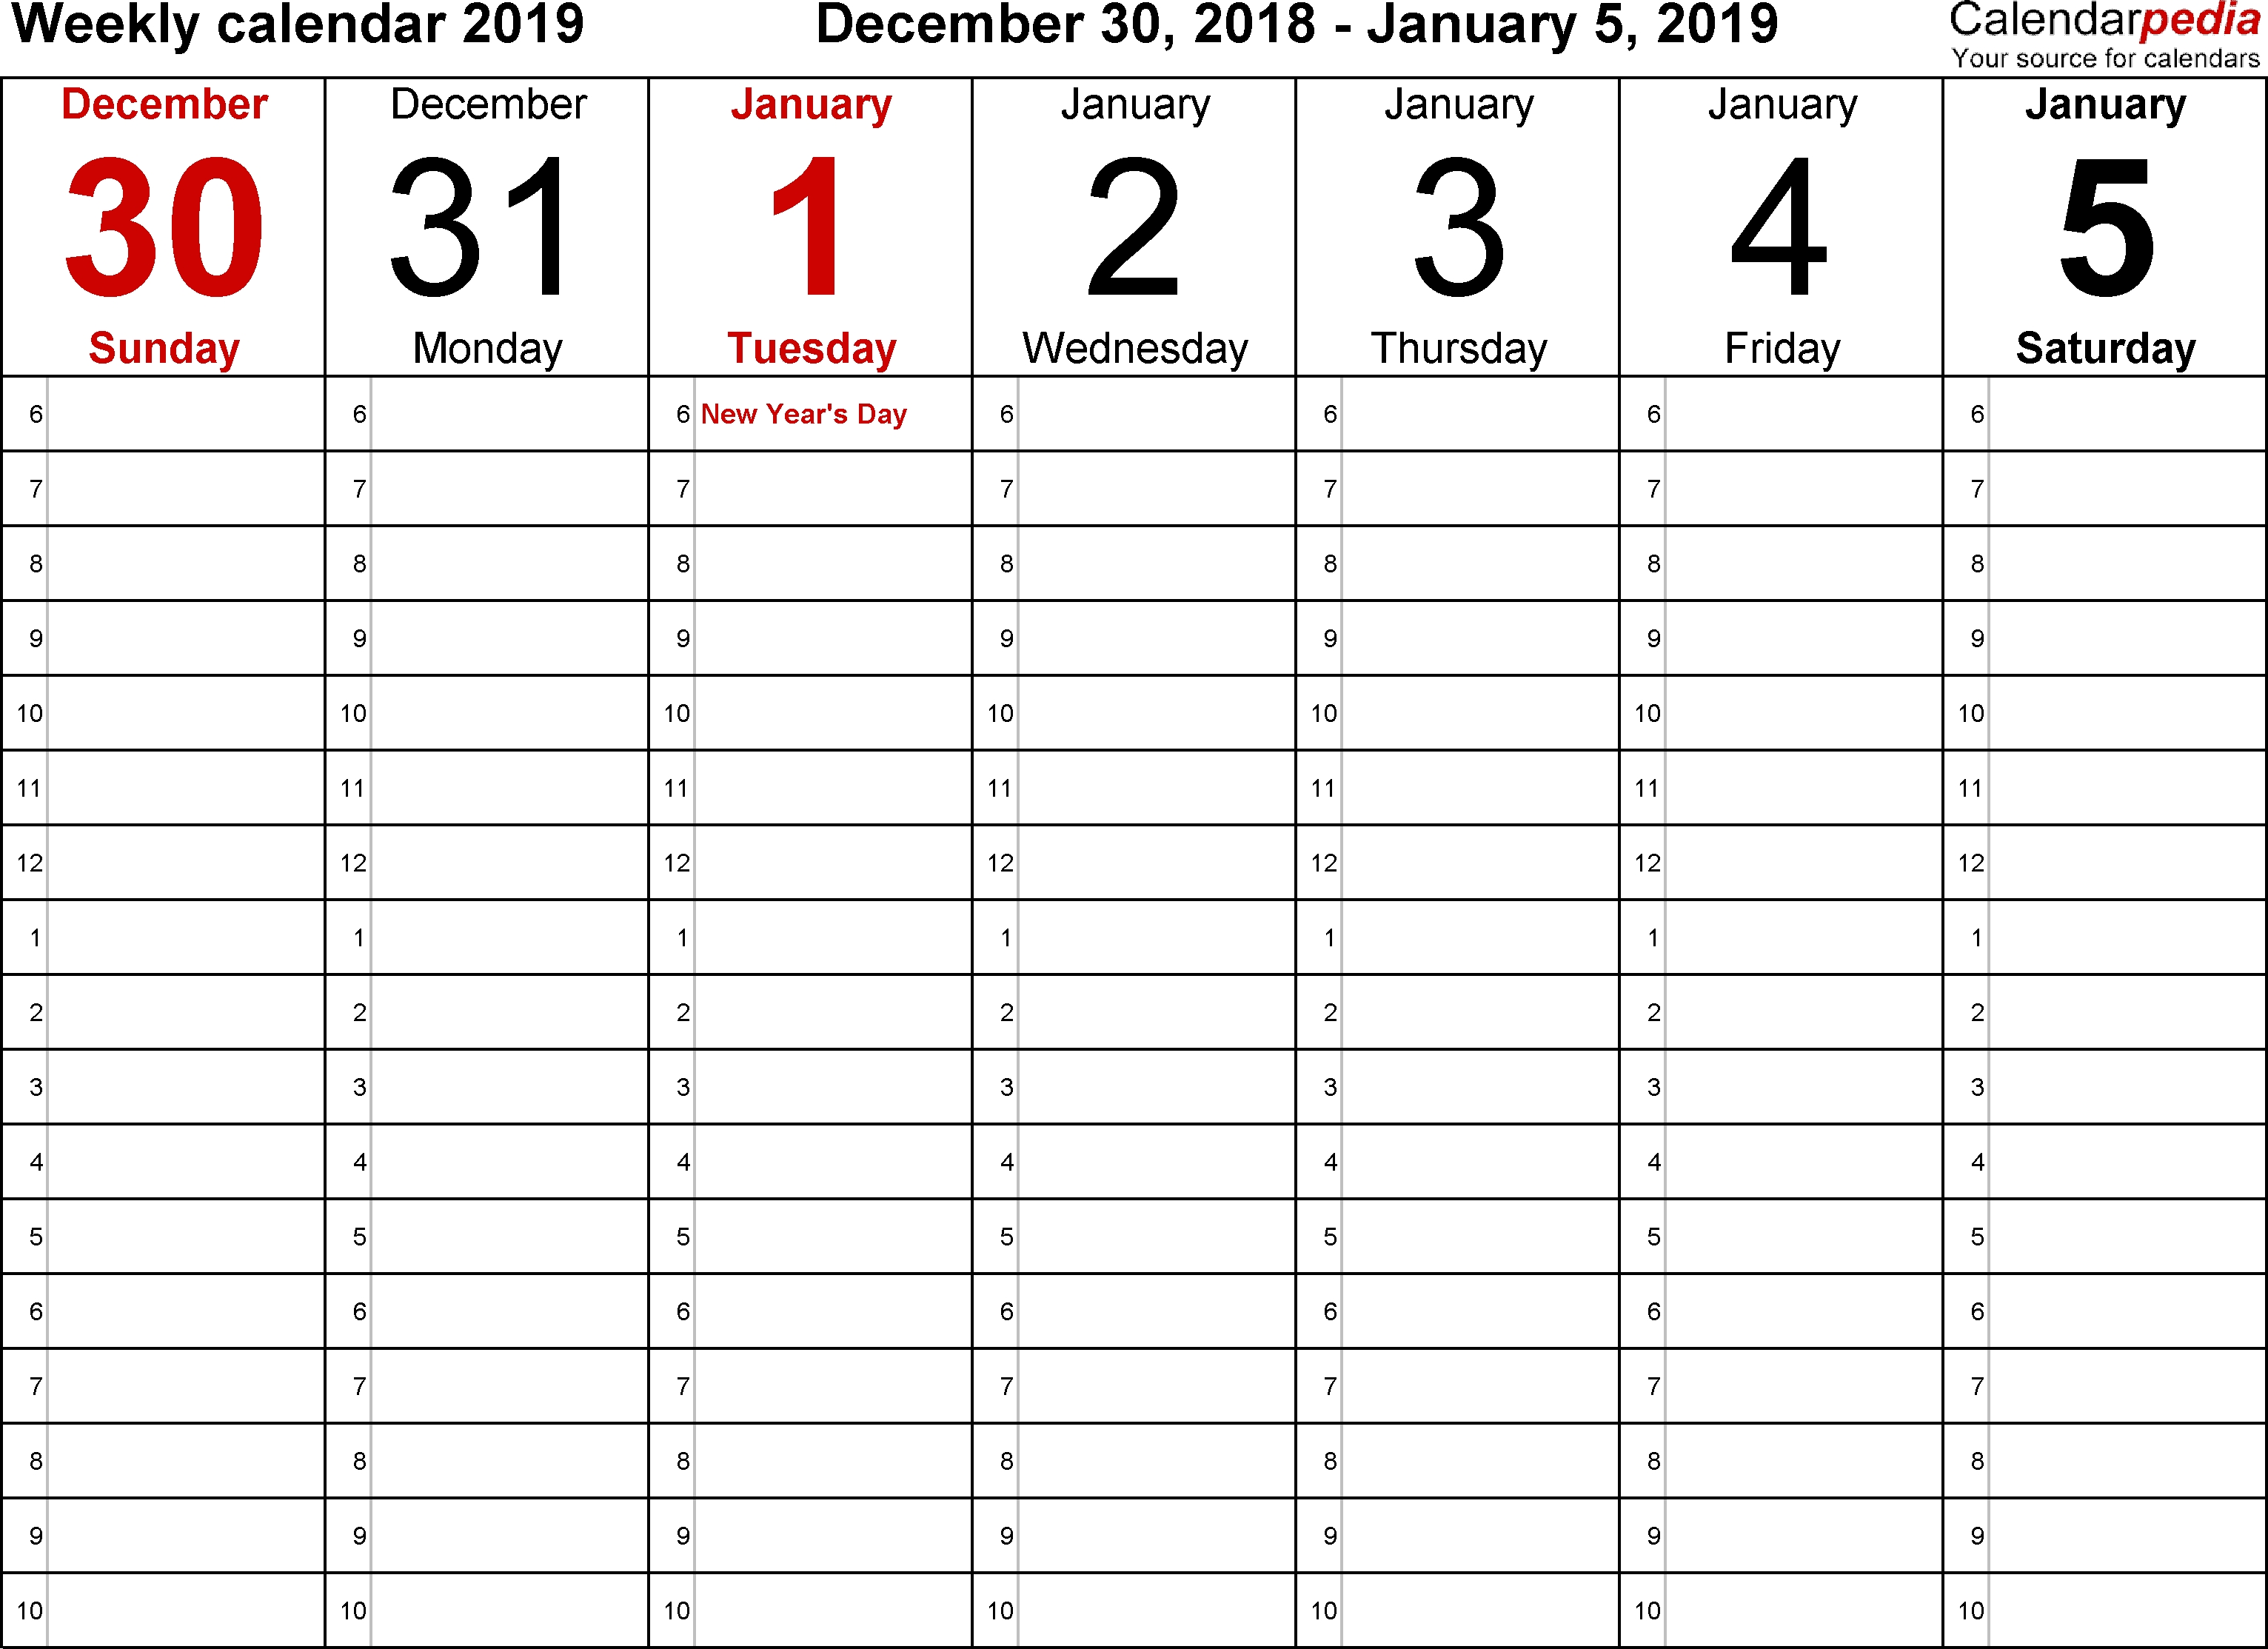 Weekly Calendar 2019 For Word - 12 Free Printable Templates intended for Extra Large Printable Blank Weekly Employee Schedule